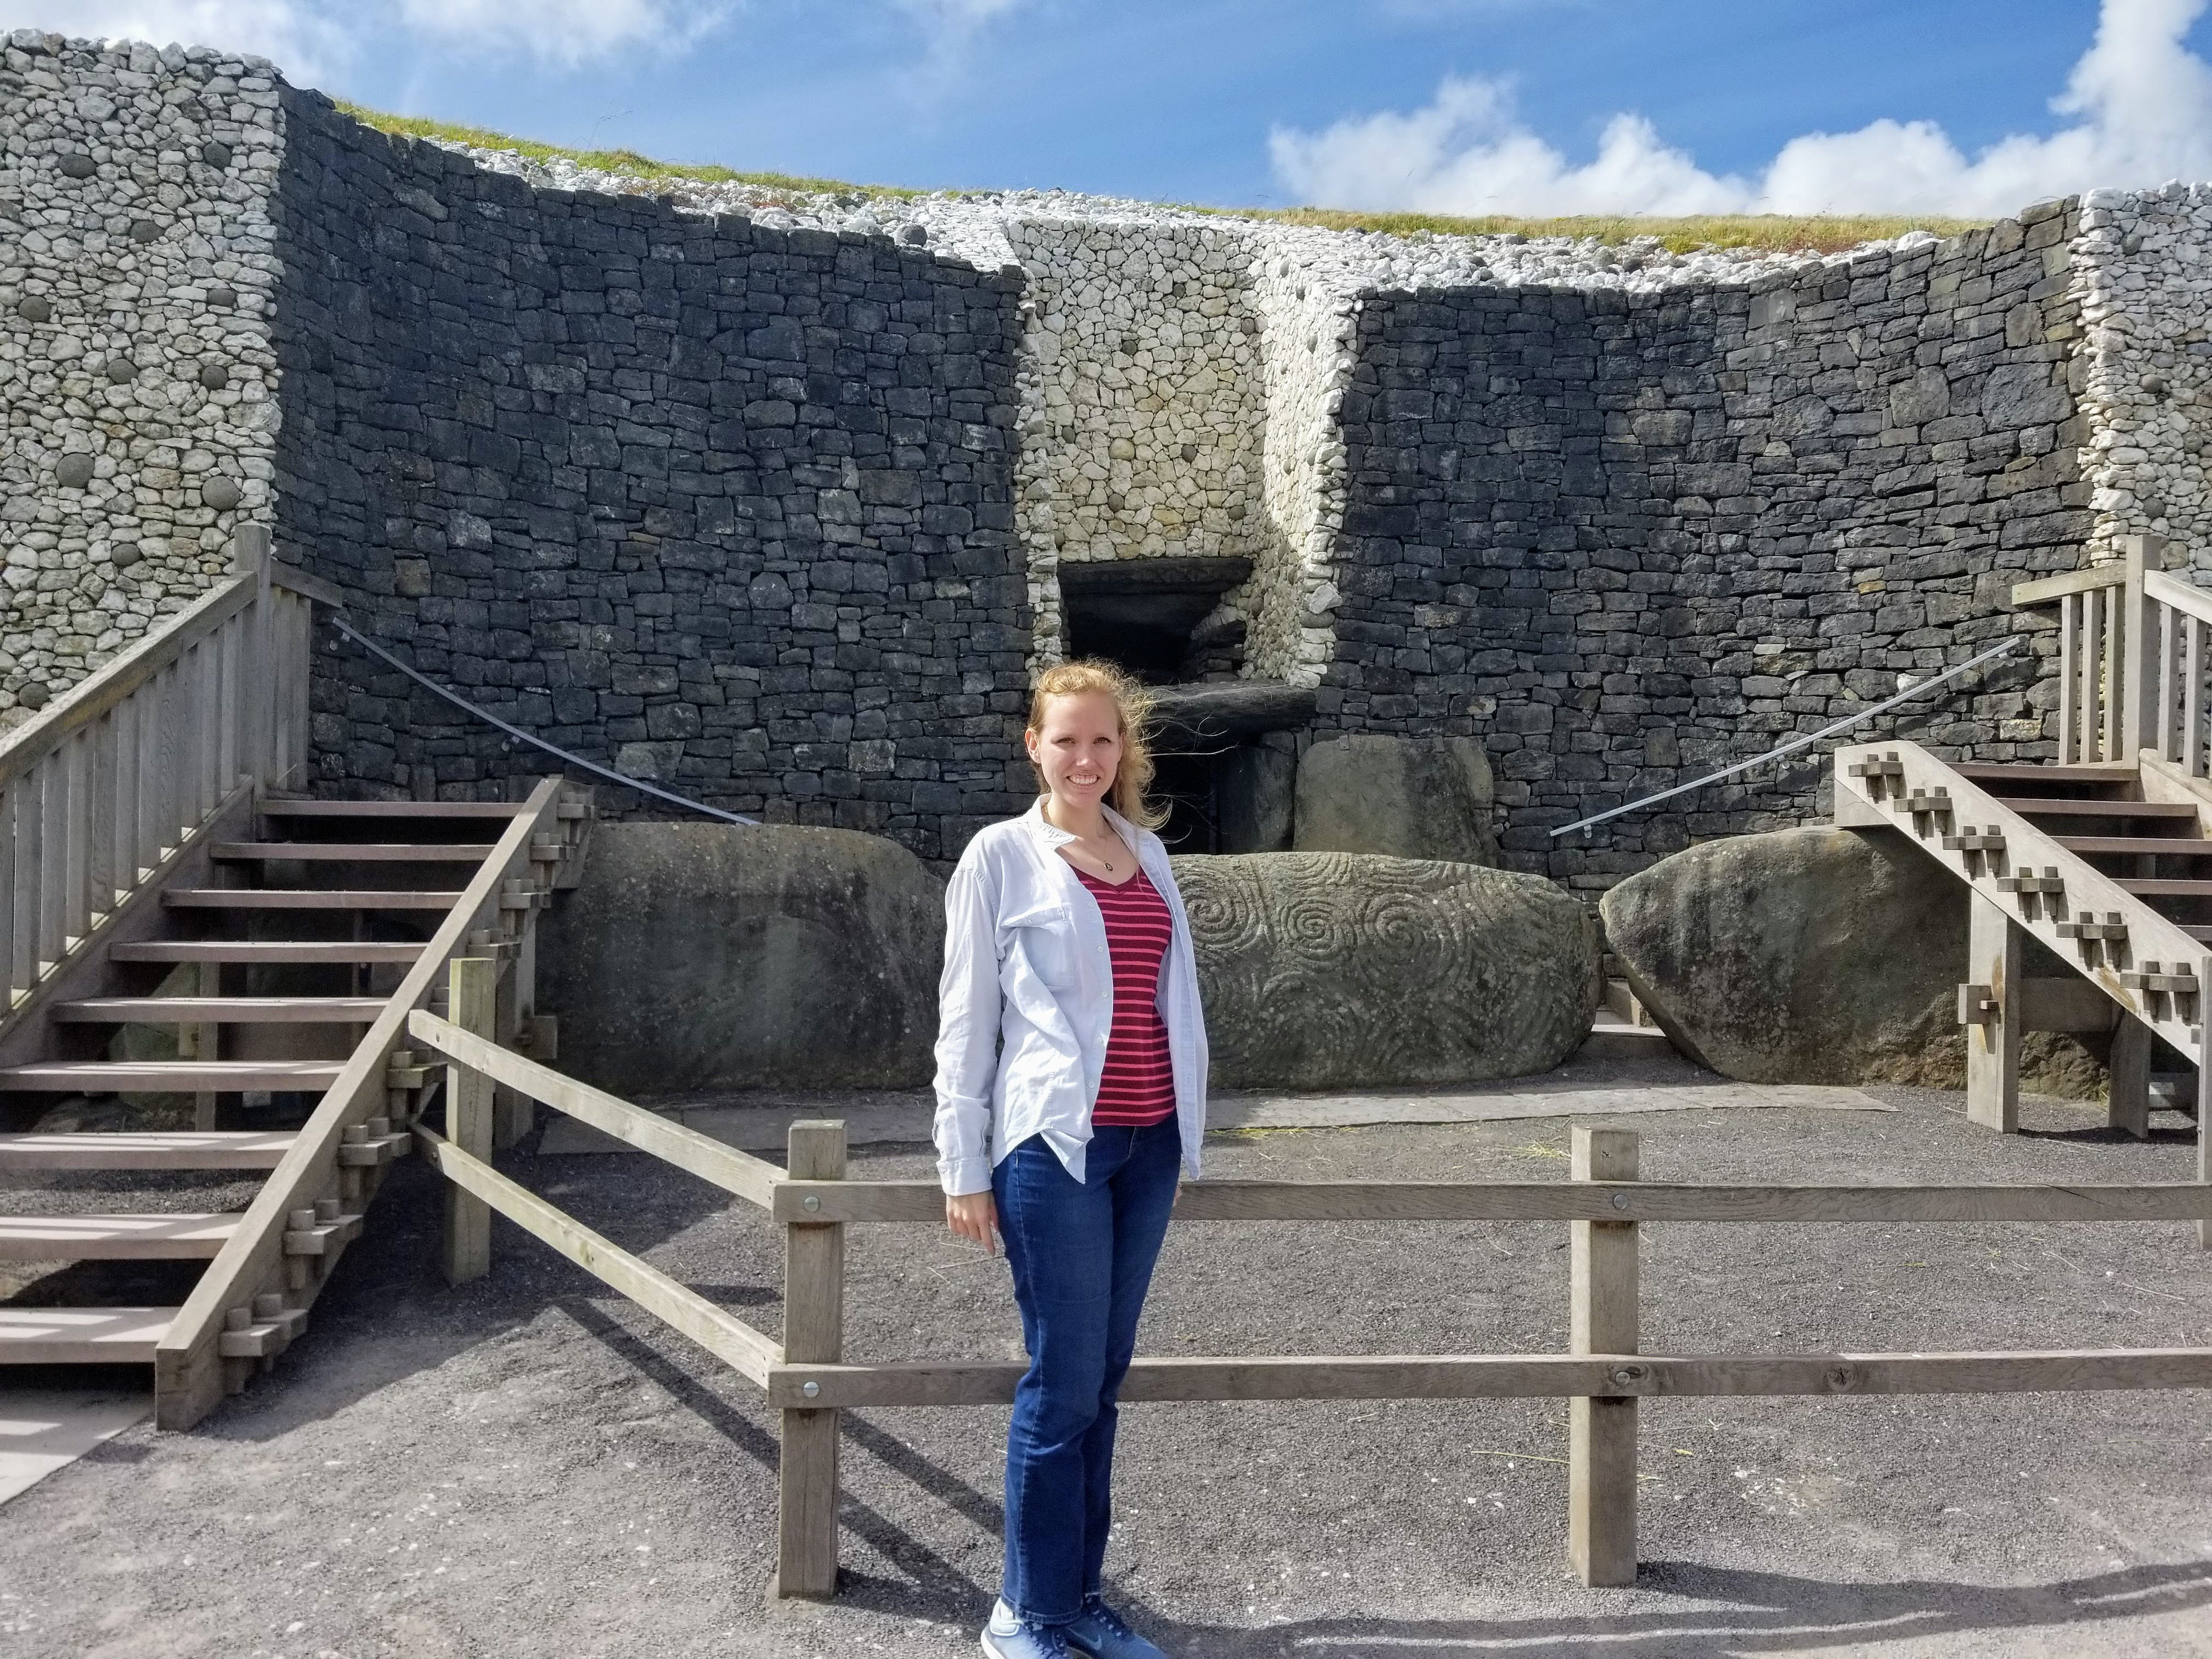 Newgrange. Large stone walls wrap around behind Author Jessica Dall. Immediately behind her are two sets of wooden steps leading to large stones, the one in the middle has been carved with megalithic art which curves in circles. The stone is called a kerbstone.